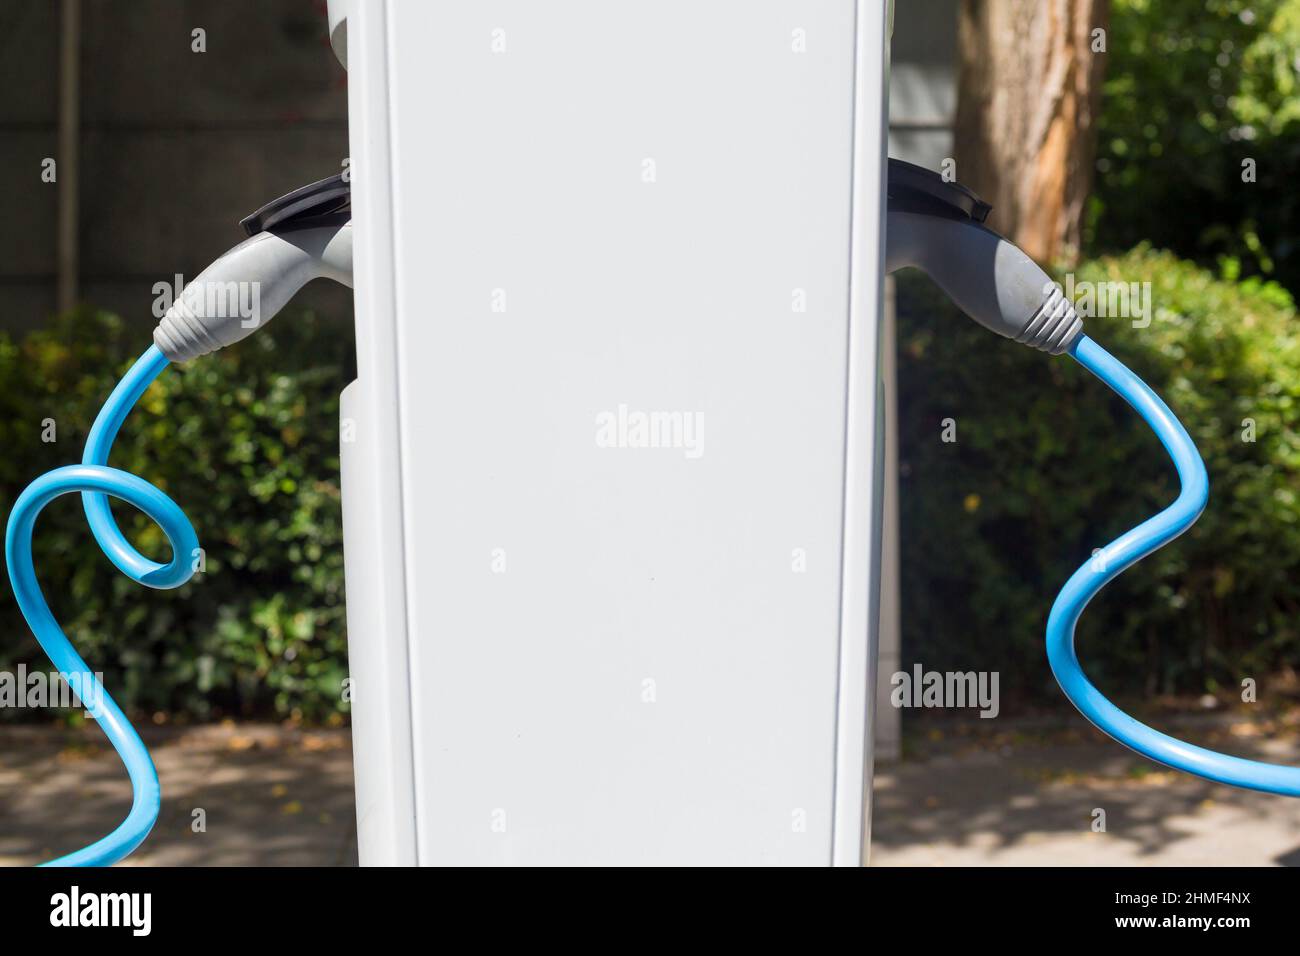 Power supply for electric car charging. Electric car charging station. Close up of the power supply plugged into an electric car being charged. Stock Photo